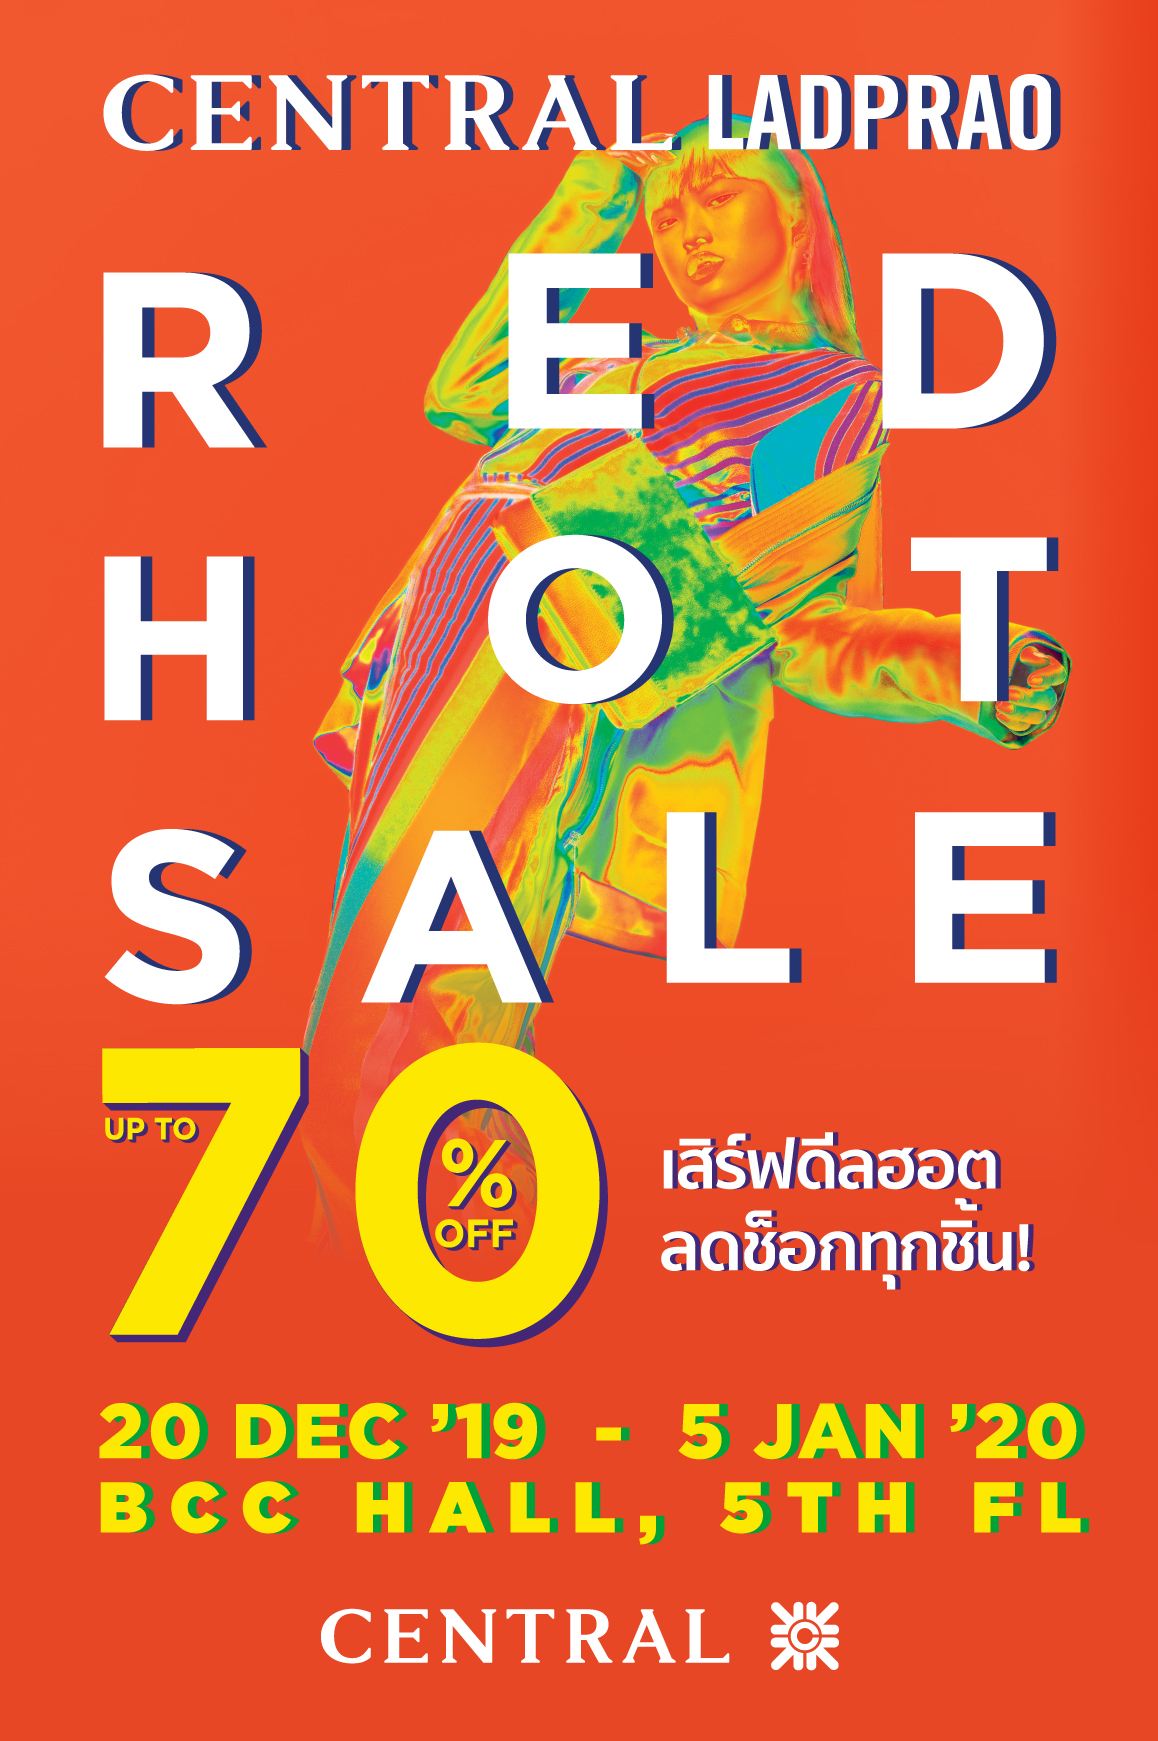 CENTRAL Ladprao Hot Sale up to 70%